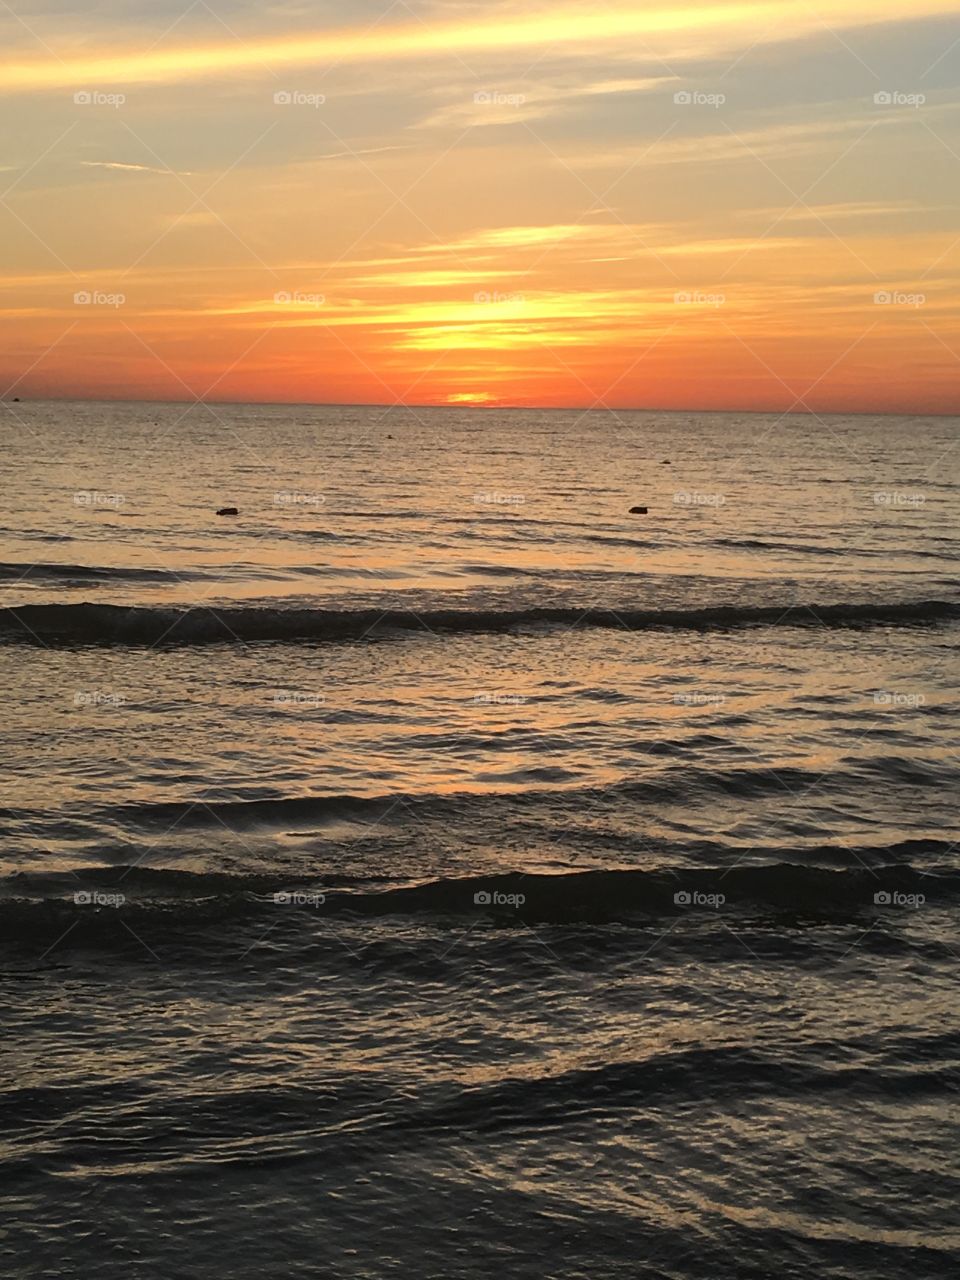 Florida sunset in January 